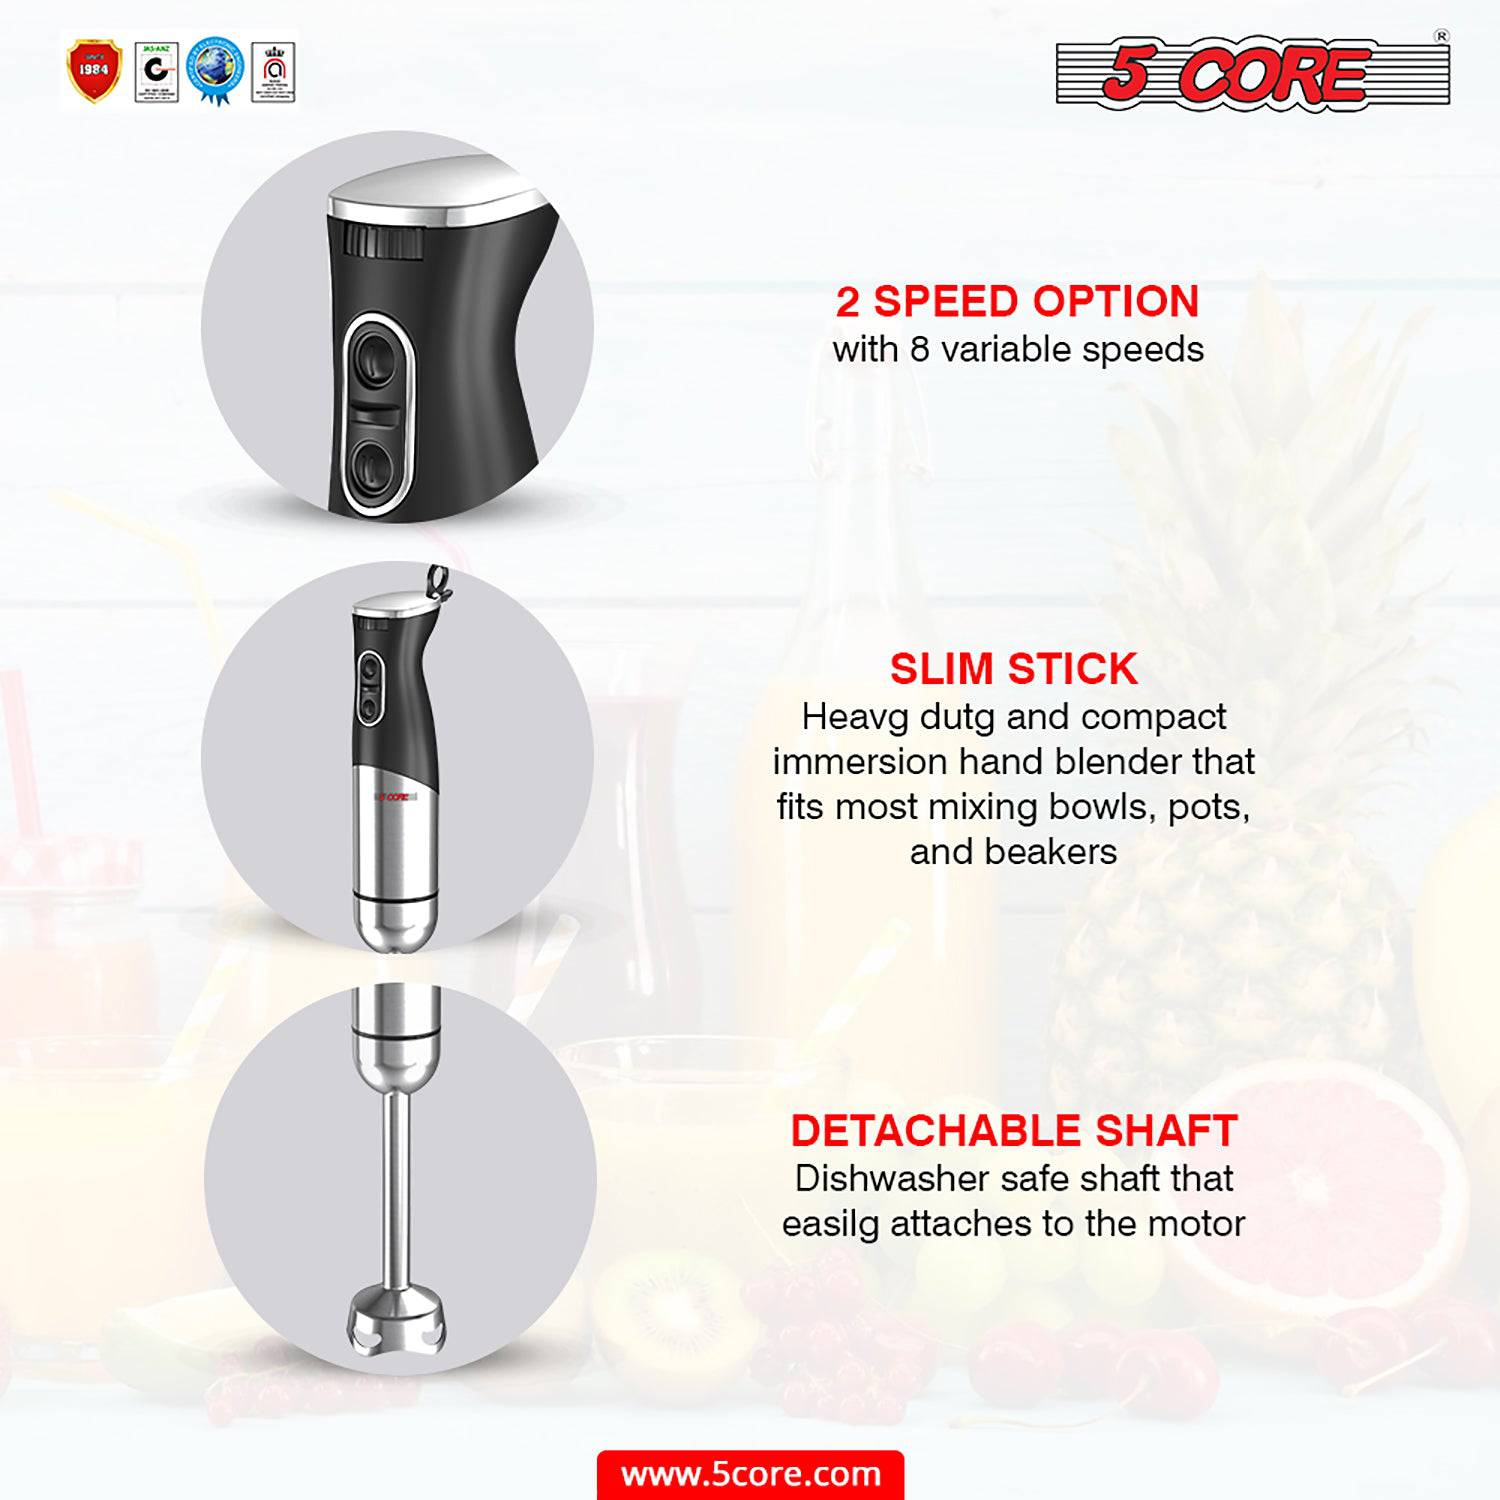 https://res.cloudinary.com/aeropost-inc/image/upload/IMX45W/5-core-kitchen-appliances-hand-blender-500w-multifunctional-electric-immersion-blender-8-variable-speed-5core-hb-1516-new-37457621123309__38977593.jpg